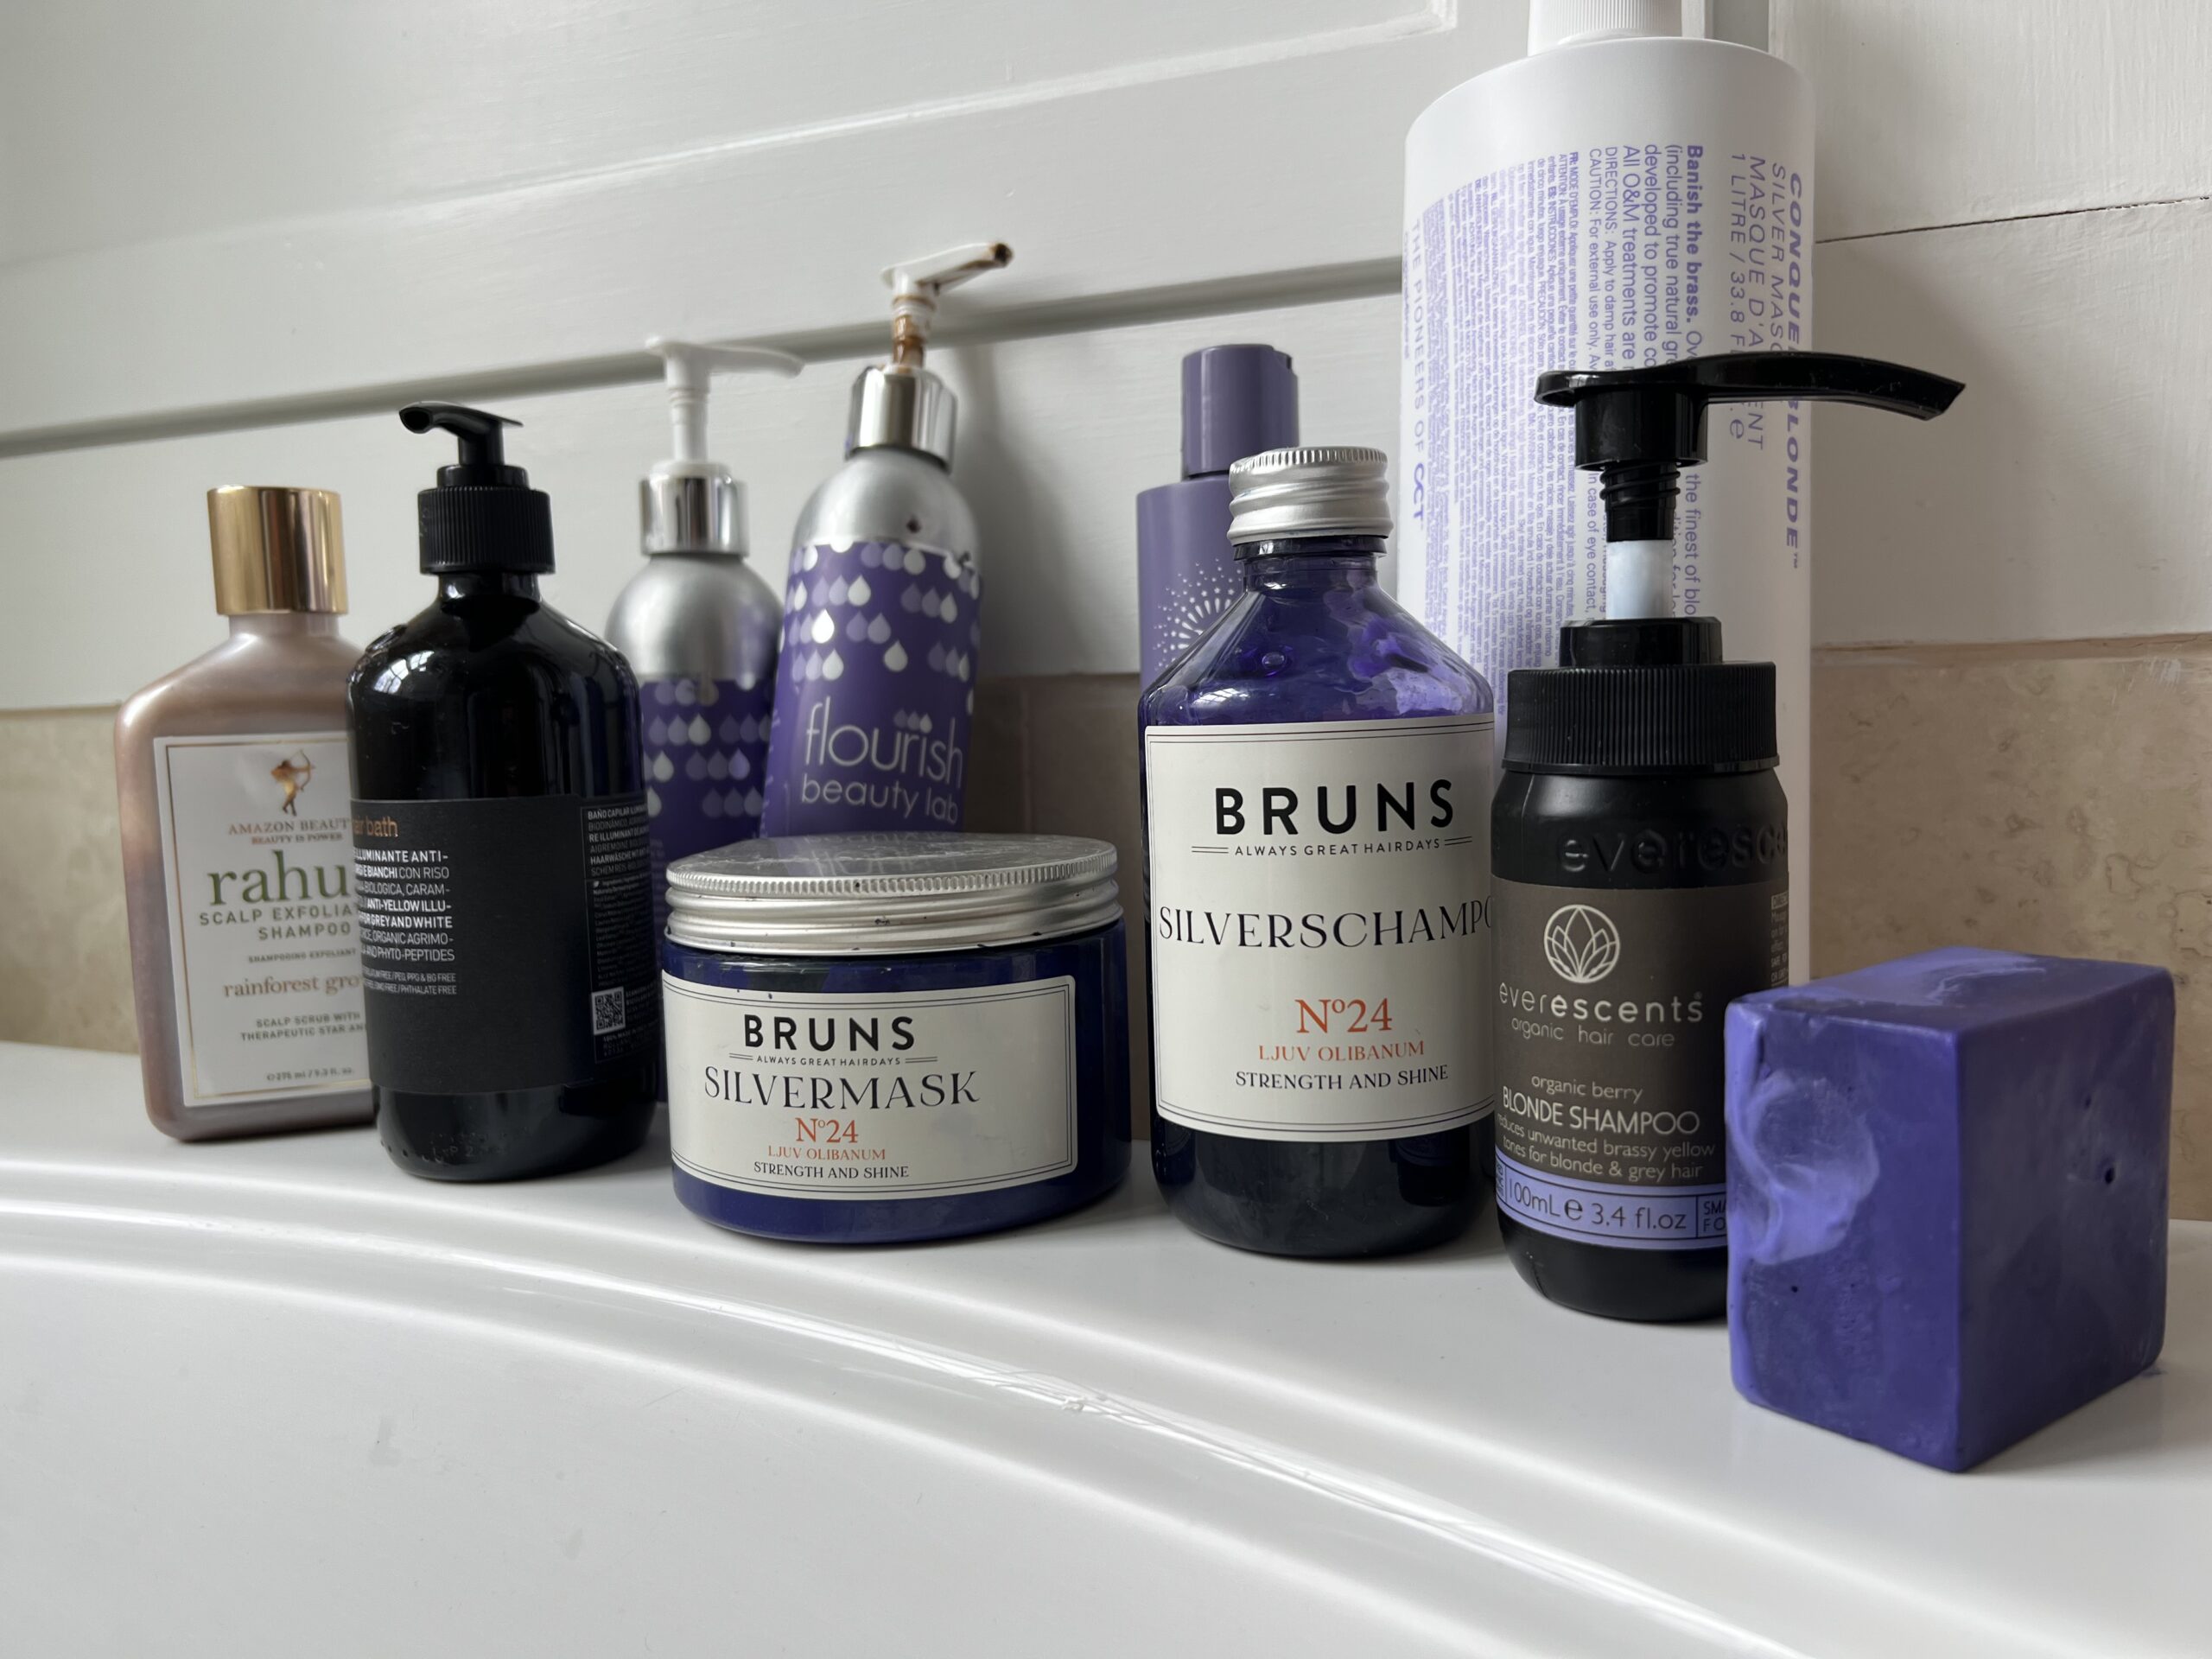 A collection of purple shampoos lined up on a bathroom sink.